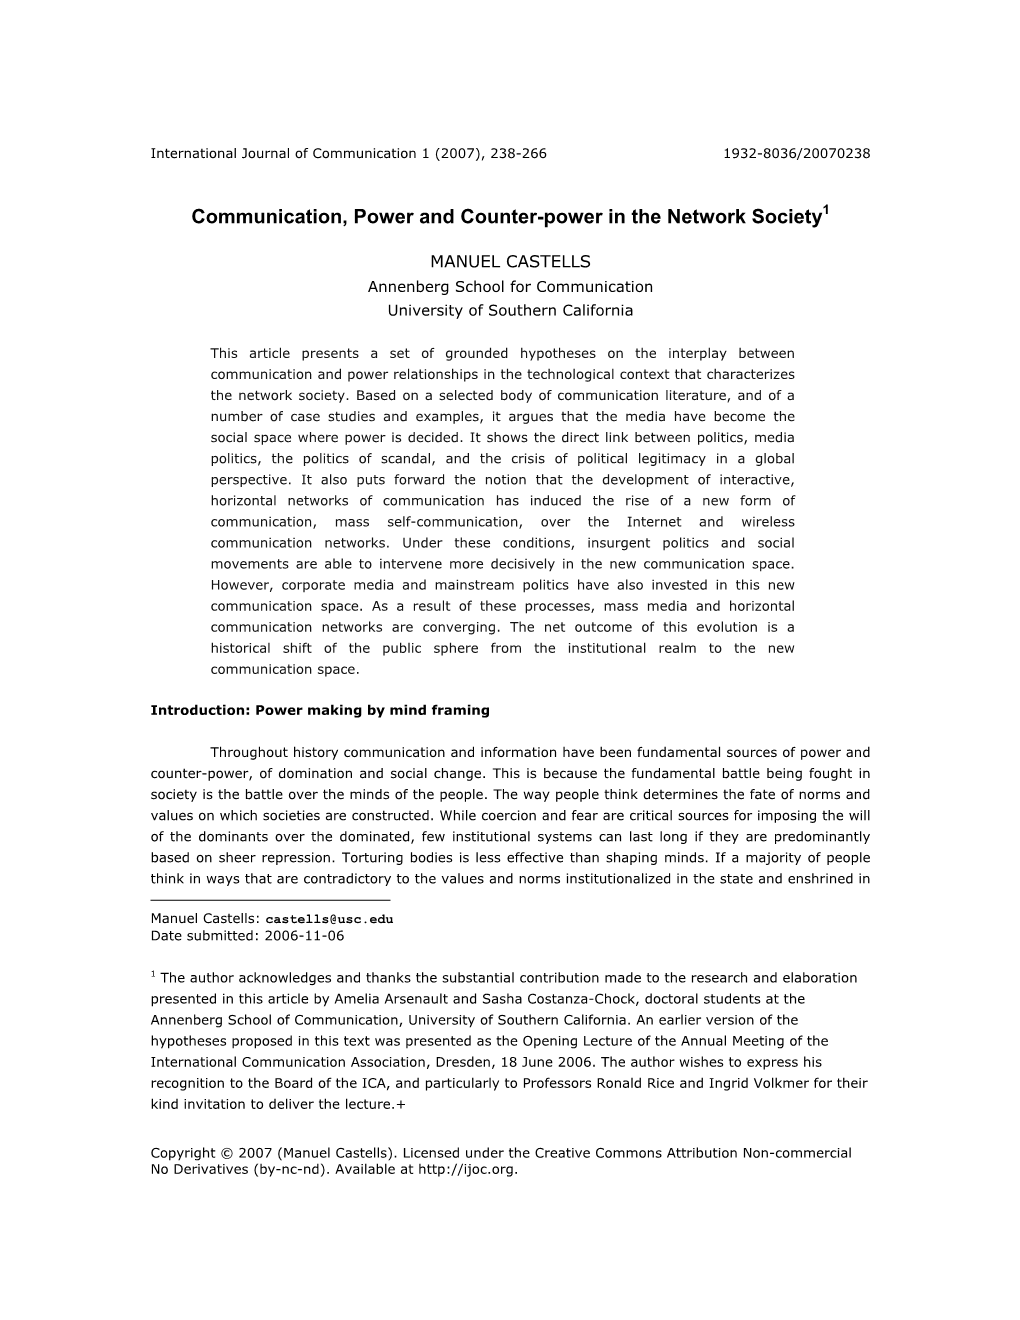 Communication, Power and Counter-Power in the Network Society1